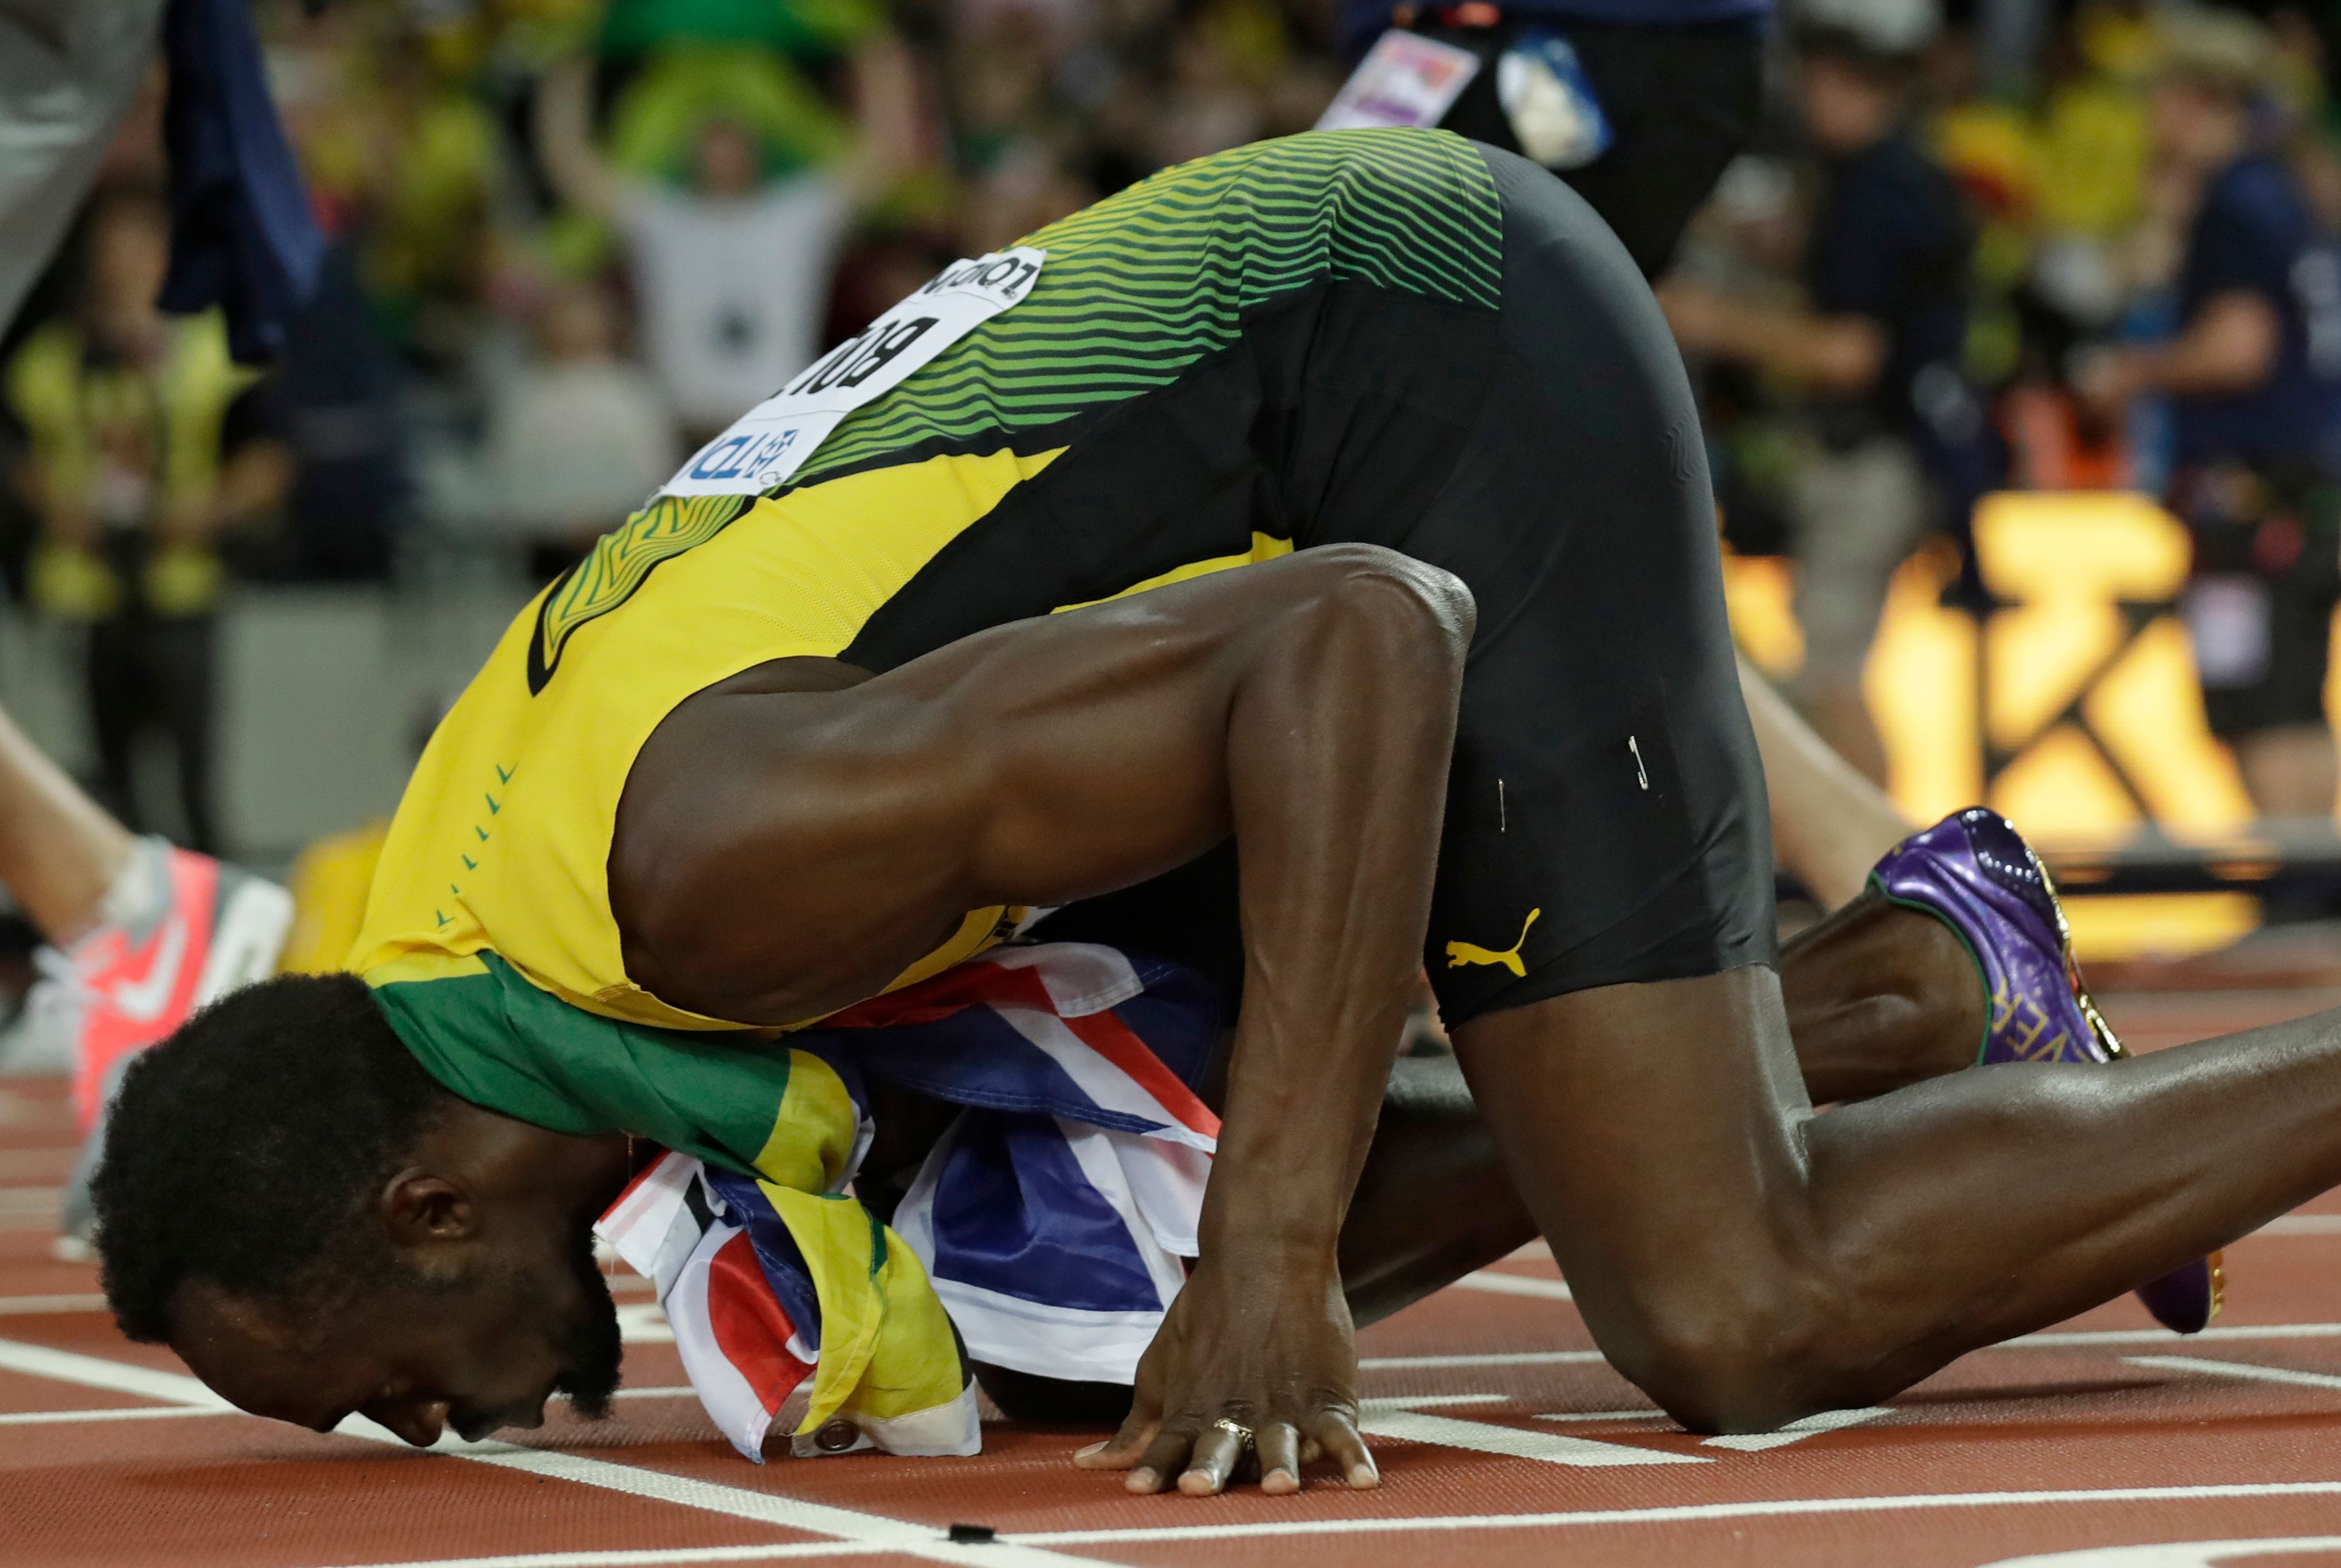 10 things you need to know about Usain Bolt, the fastest man alive